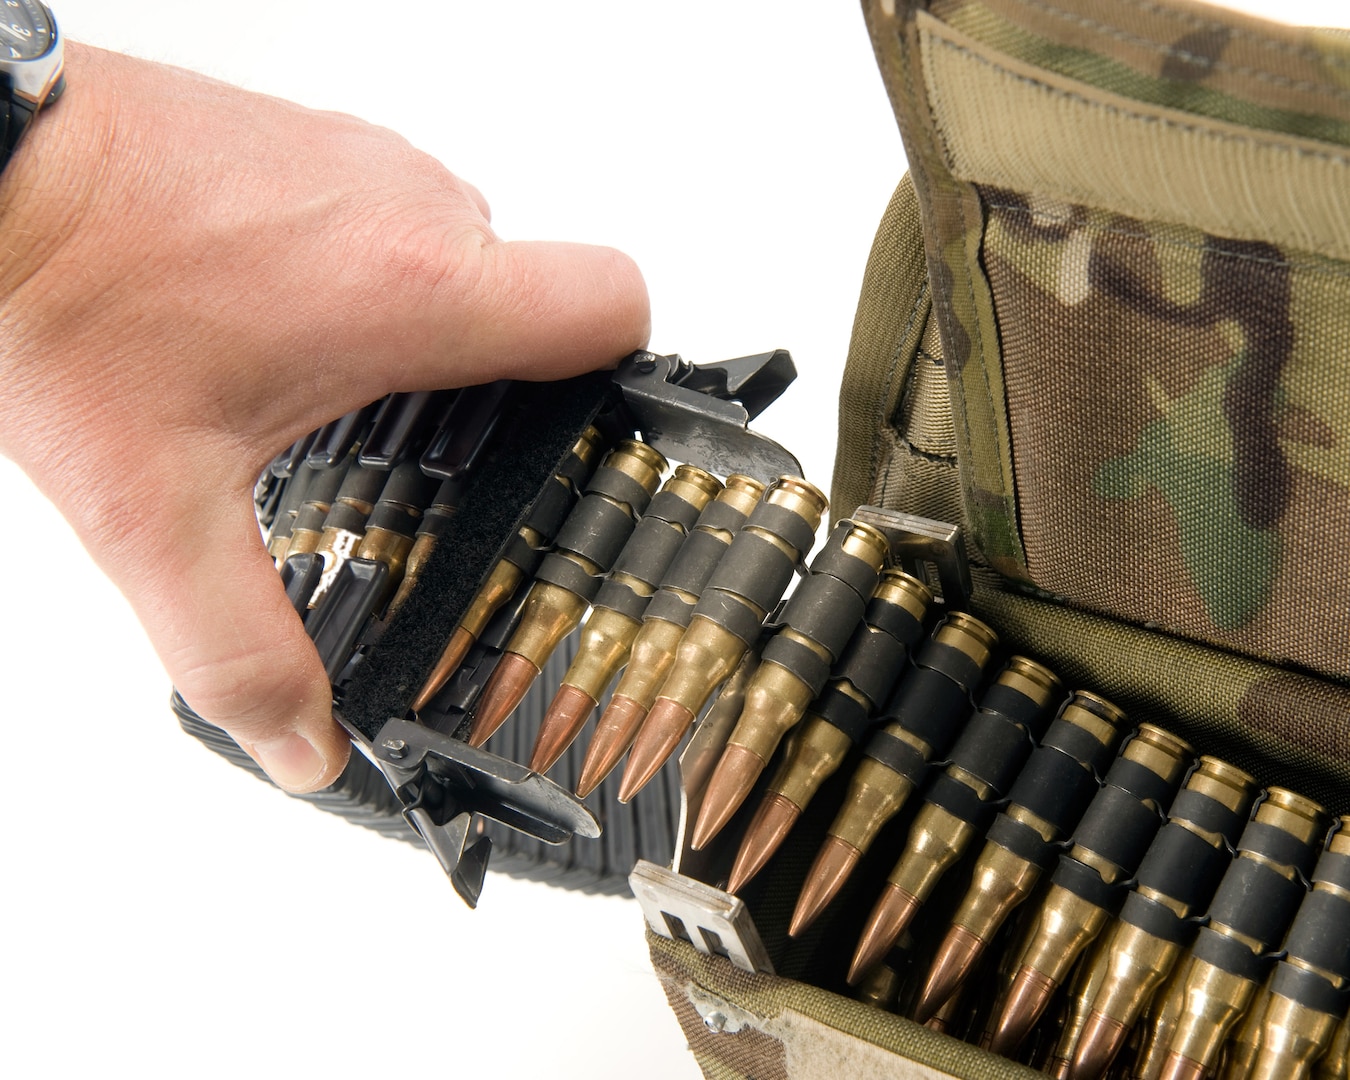 The "ironman" pack can hold 500 rounds of ammunition for a crew-served weapon. Iowa National Guard members invented the pack as a solution for carrying and employing ammunition during the war-fight when it is difficult to have a designated ammo bearer.